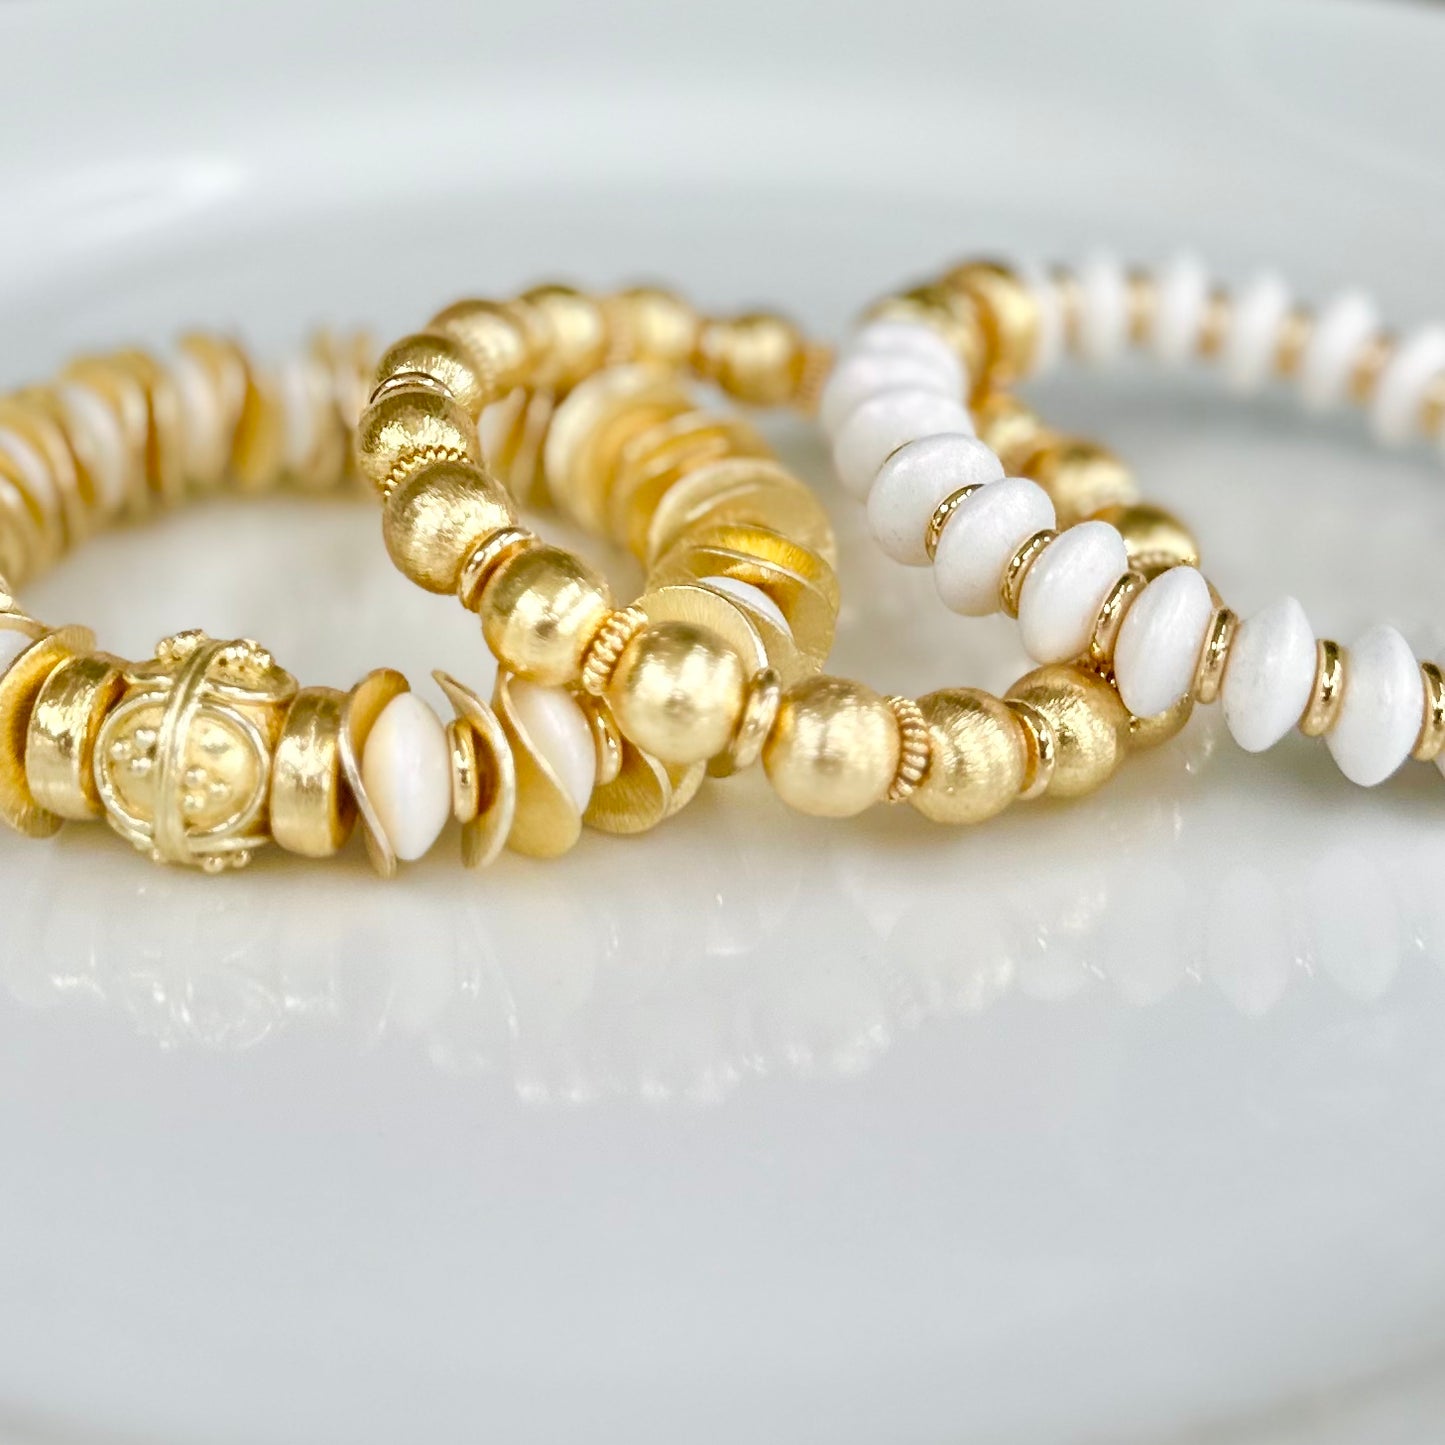 NEW! GOLD WAVY DISC AND WHITE OPALIZED STATEMENT BRACELET